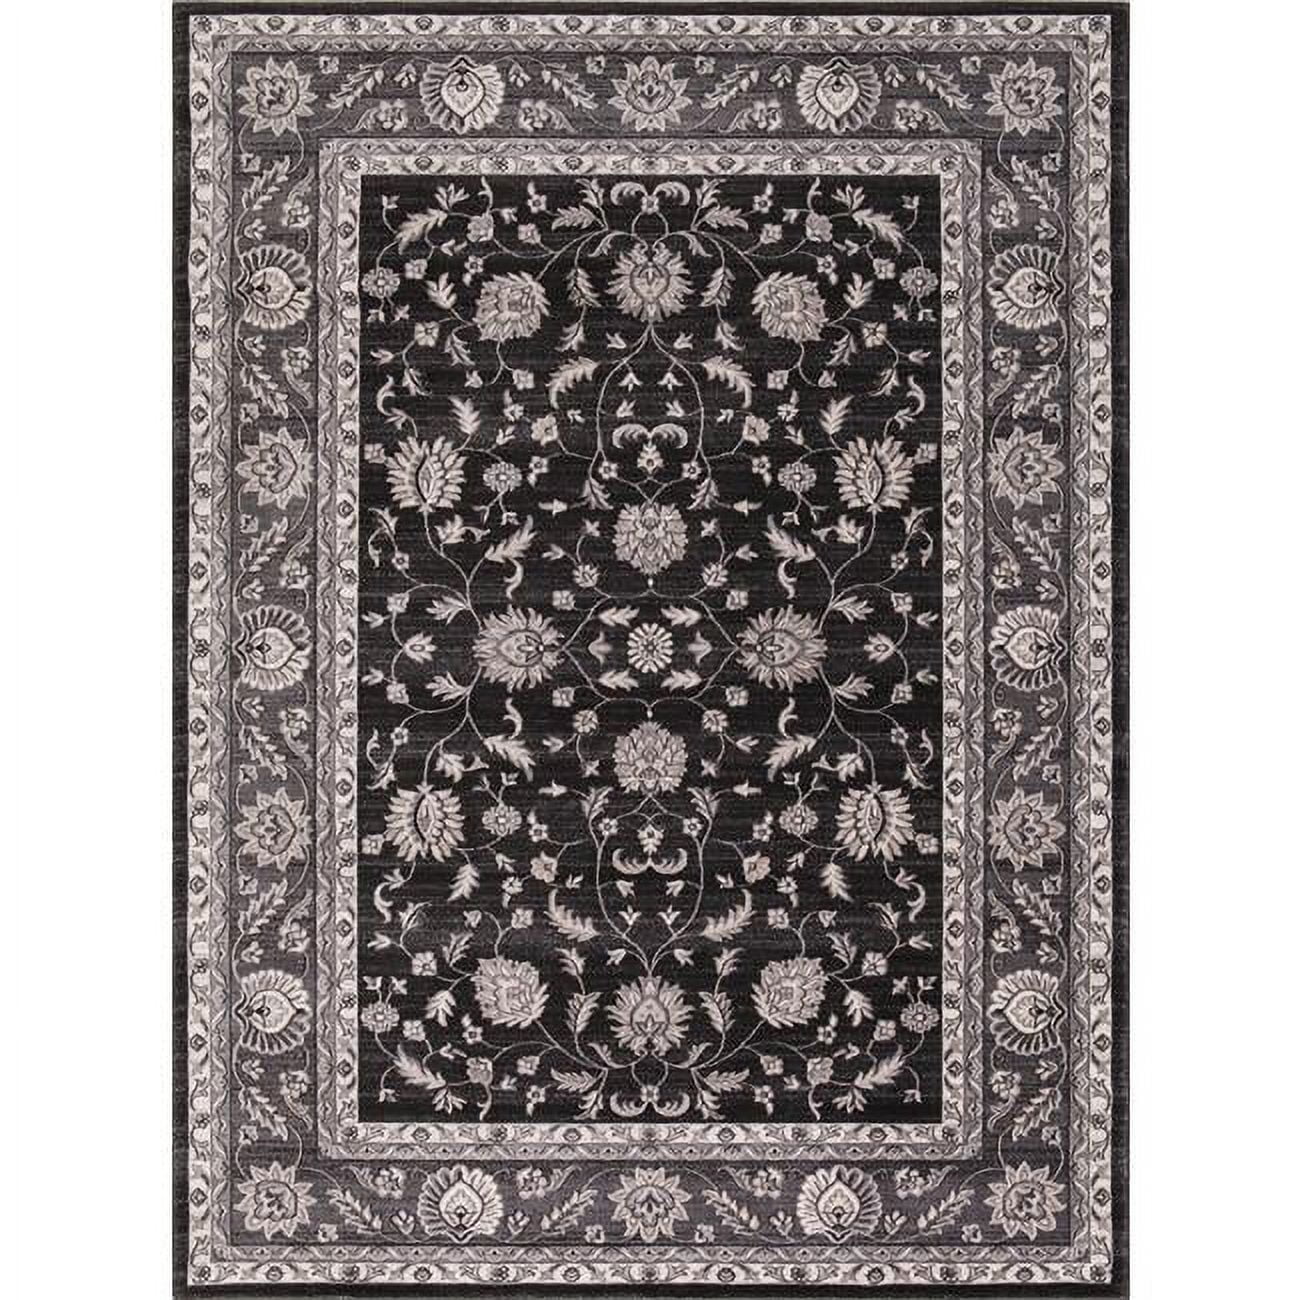 Concord Global 28236 6 Ft. 7 In. X 9 Ft. 3 In. Kashan Mahal - Anthracite